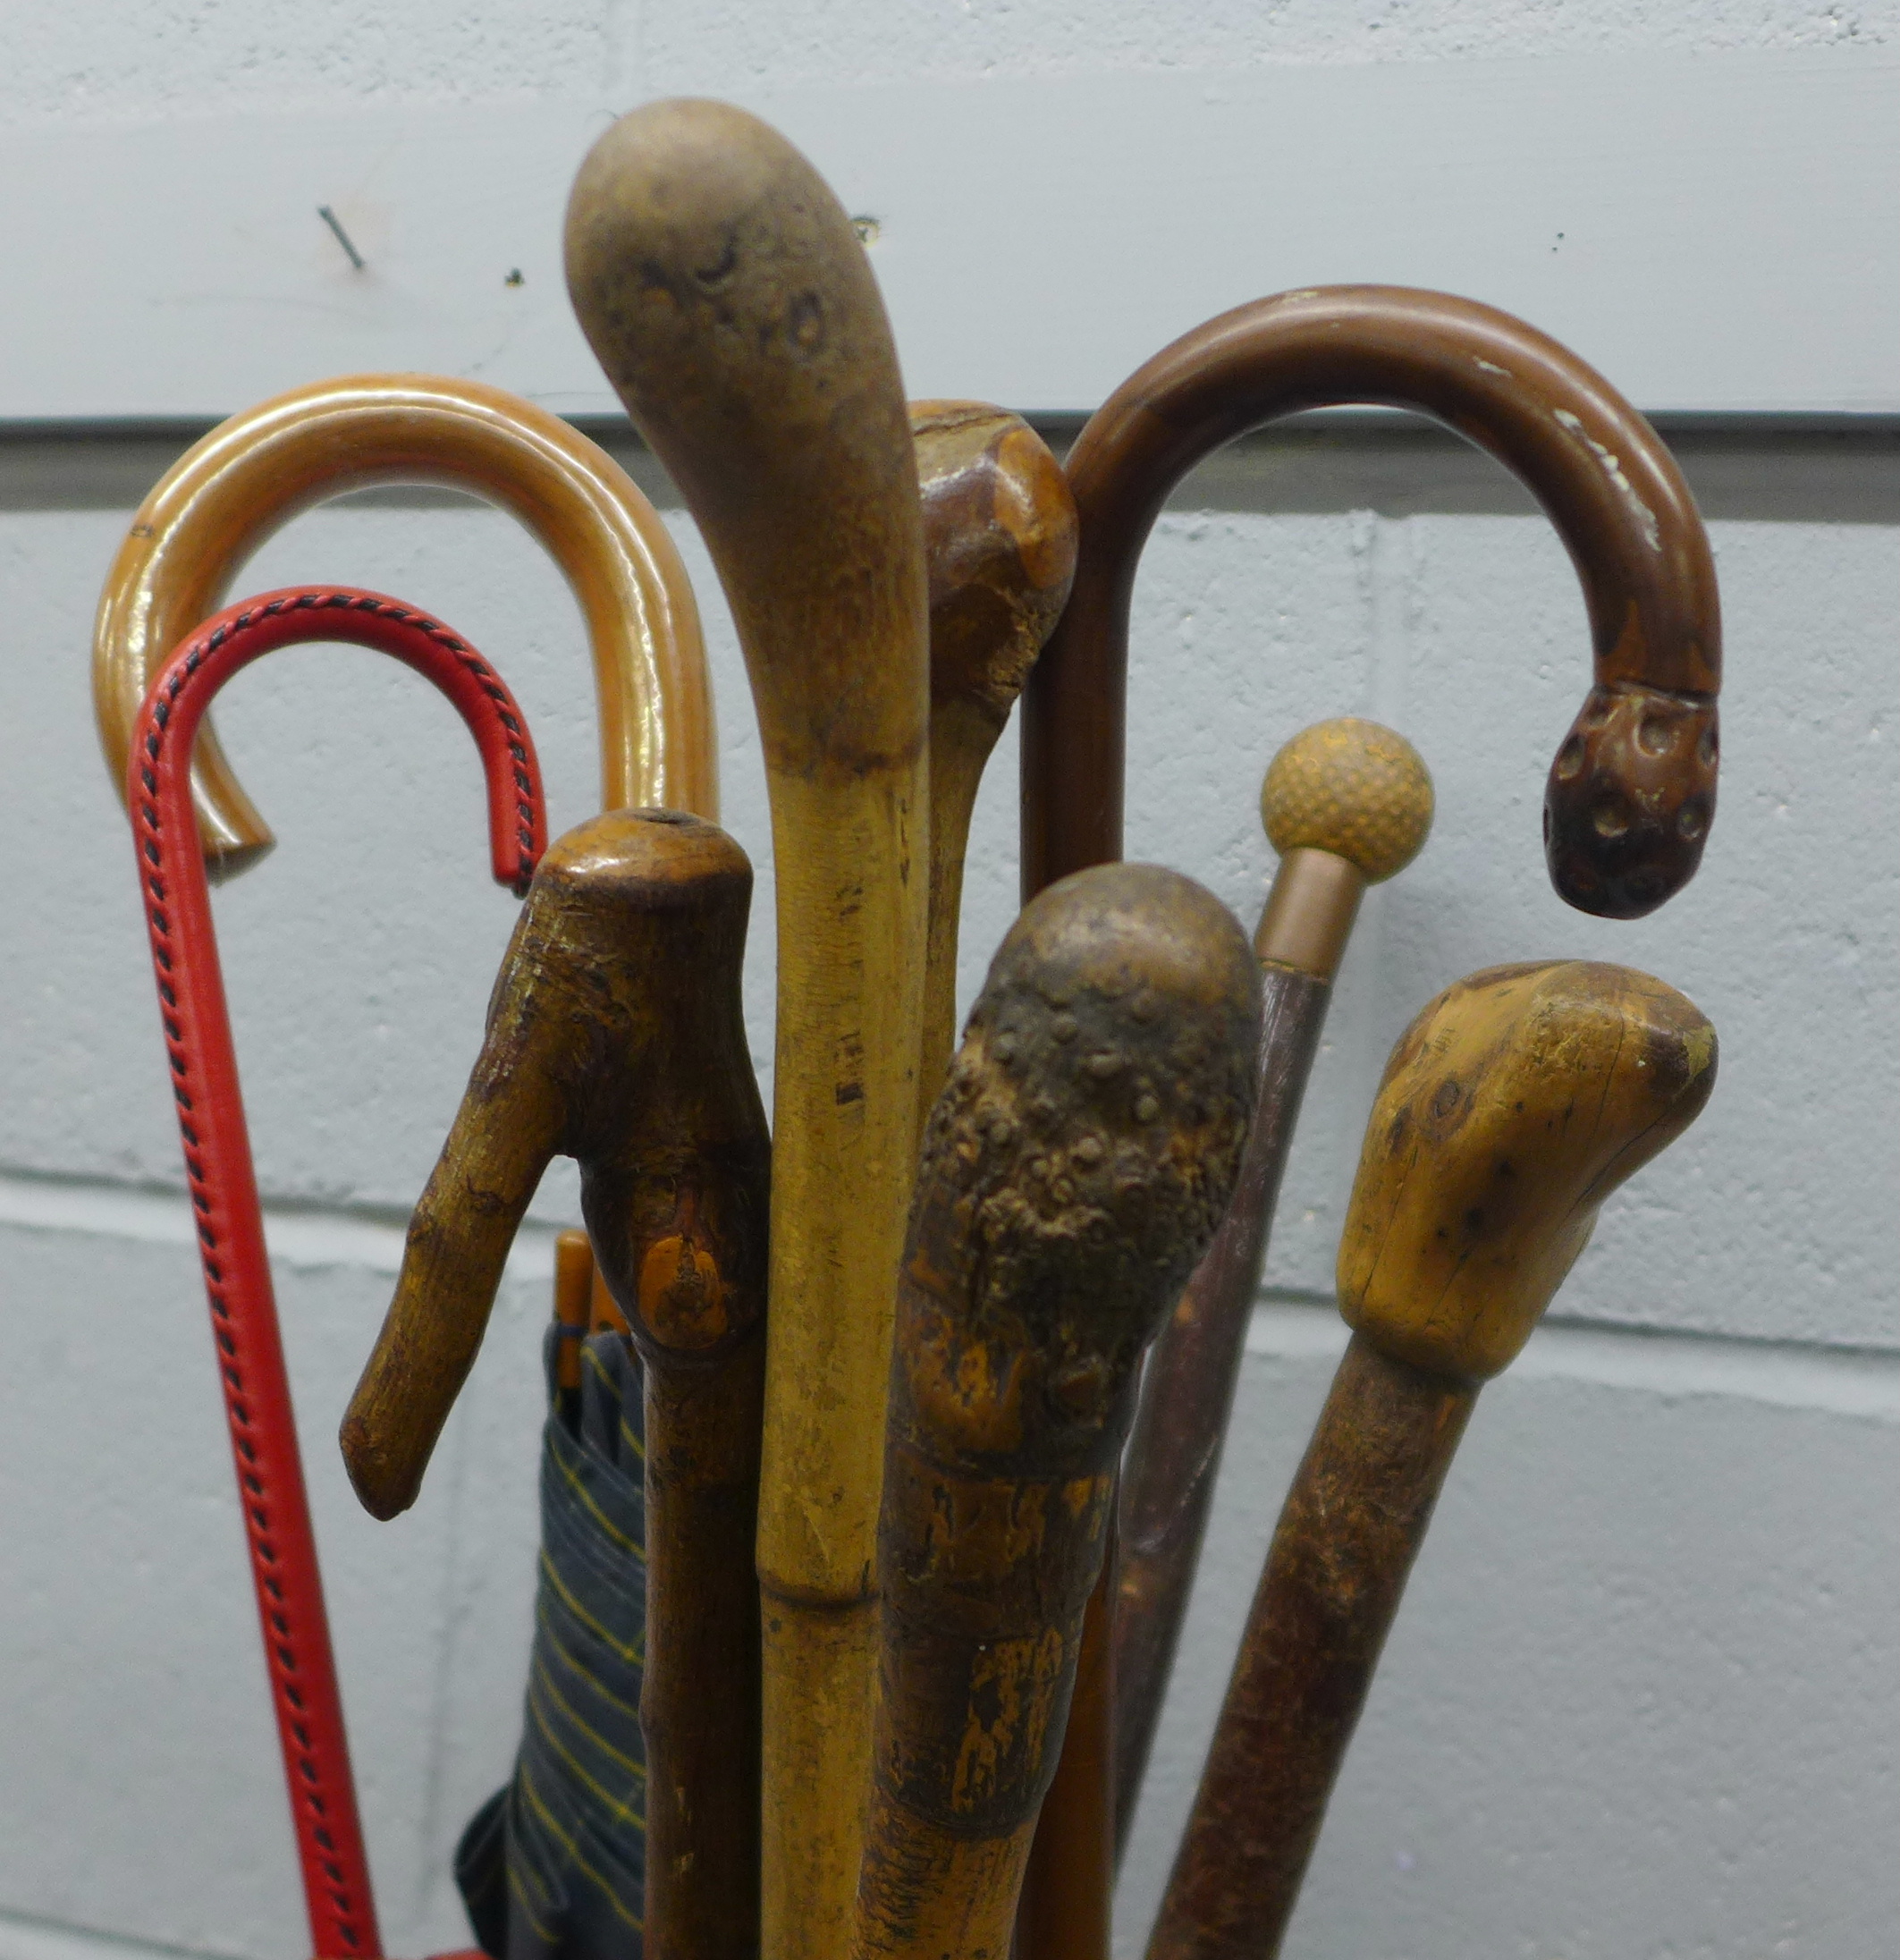 A West German vase/stick stand with a collection of walking sticks and umbrellas - Image 2 of 3